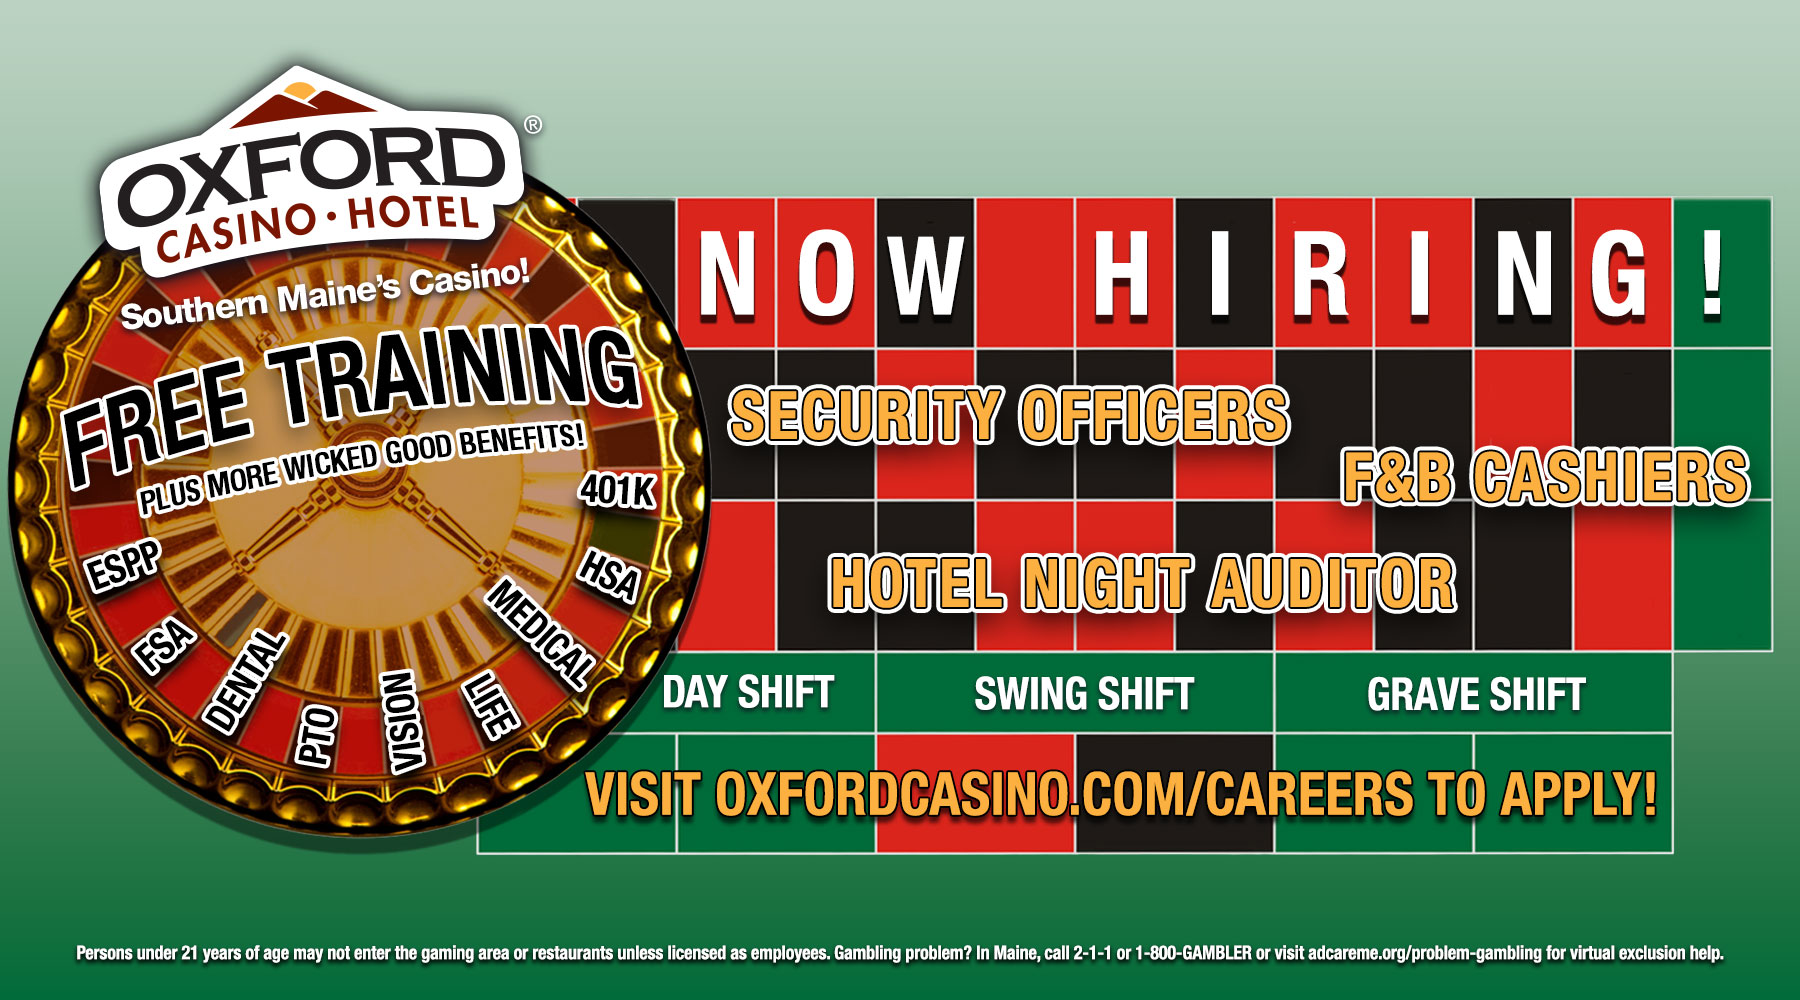 Now Hiring at Oxford Casino Hotel!